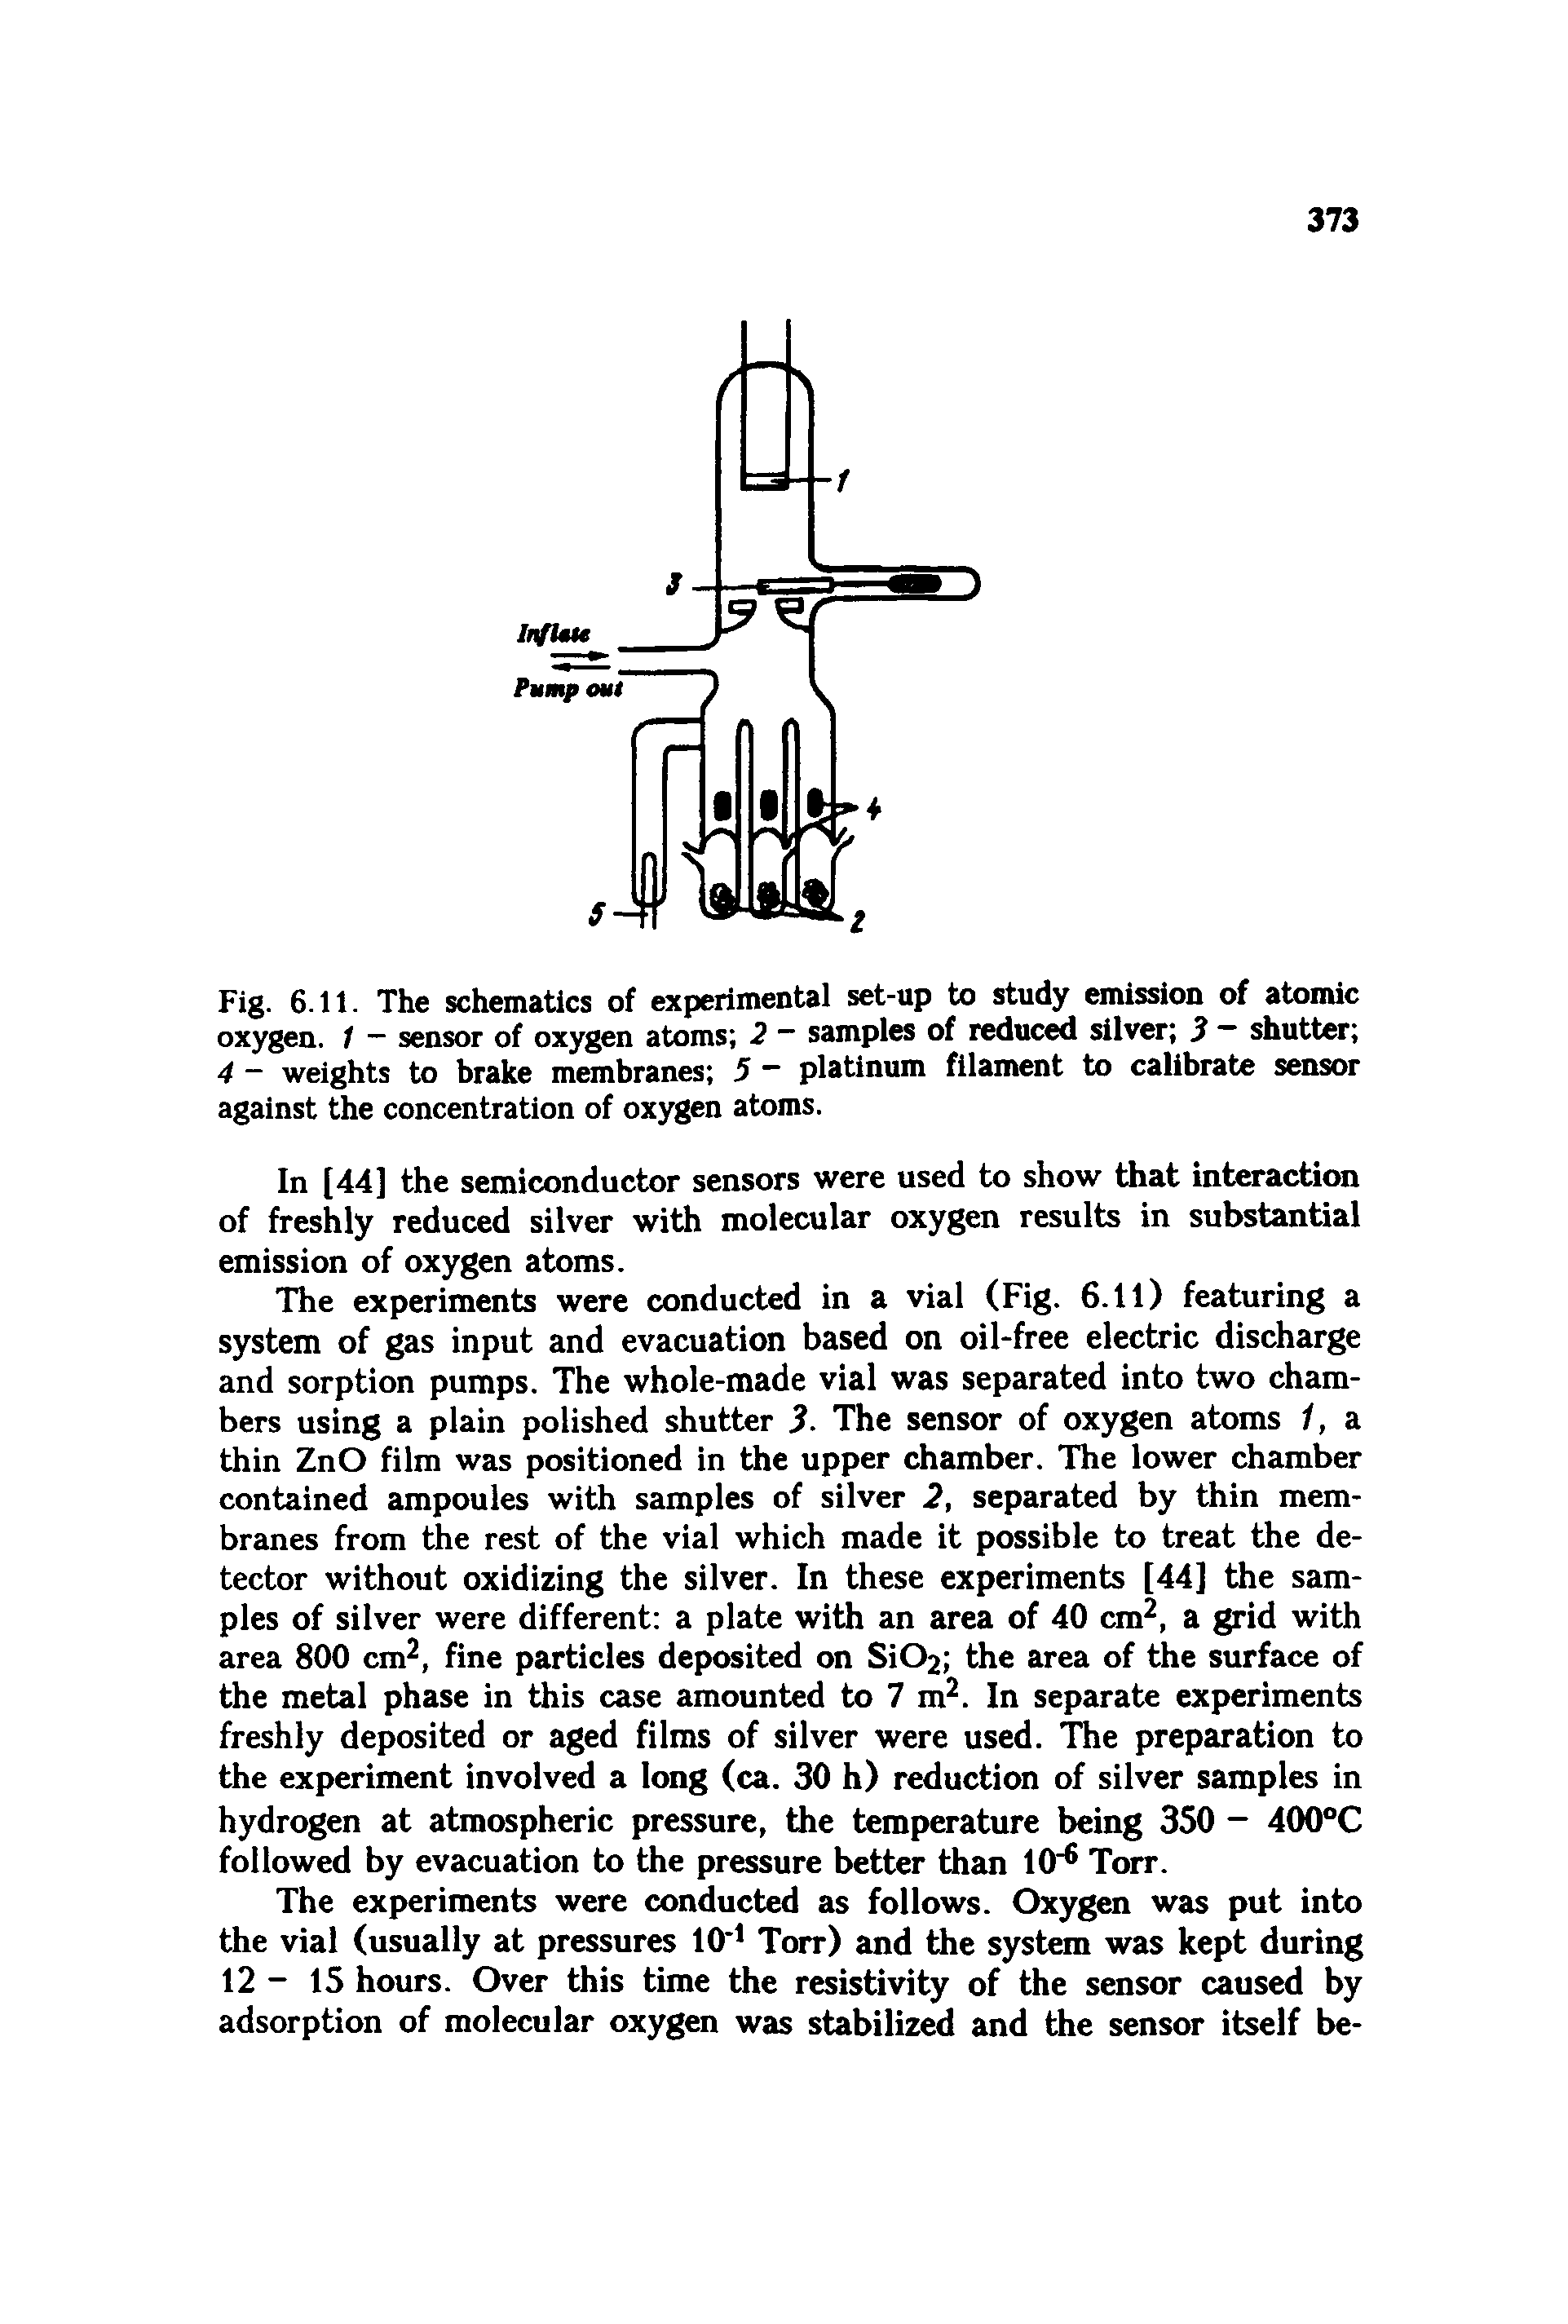 Fig. 6.11. The schematics of experimental set-up to study emission of atomic oxygen. 1 — sensor of oxygen atoms 2 samples of reduced silver 3 shutter 4 weights to brake membranes 5 platinum filament to calibrate sensor against the concentration of oxygen atoms.